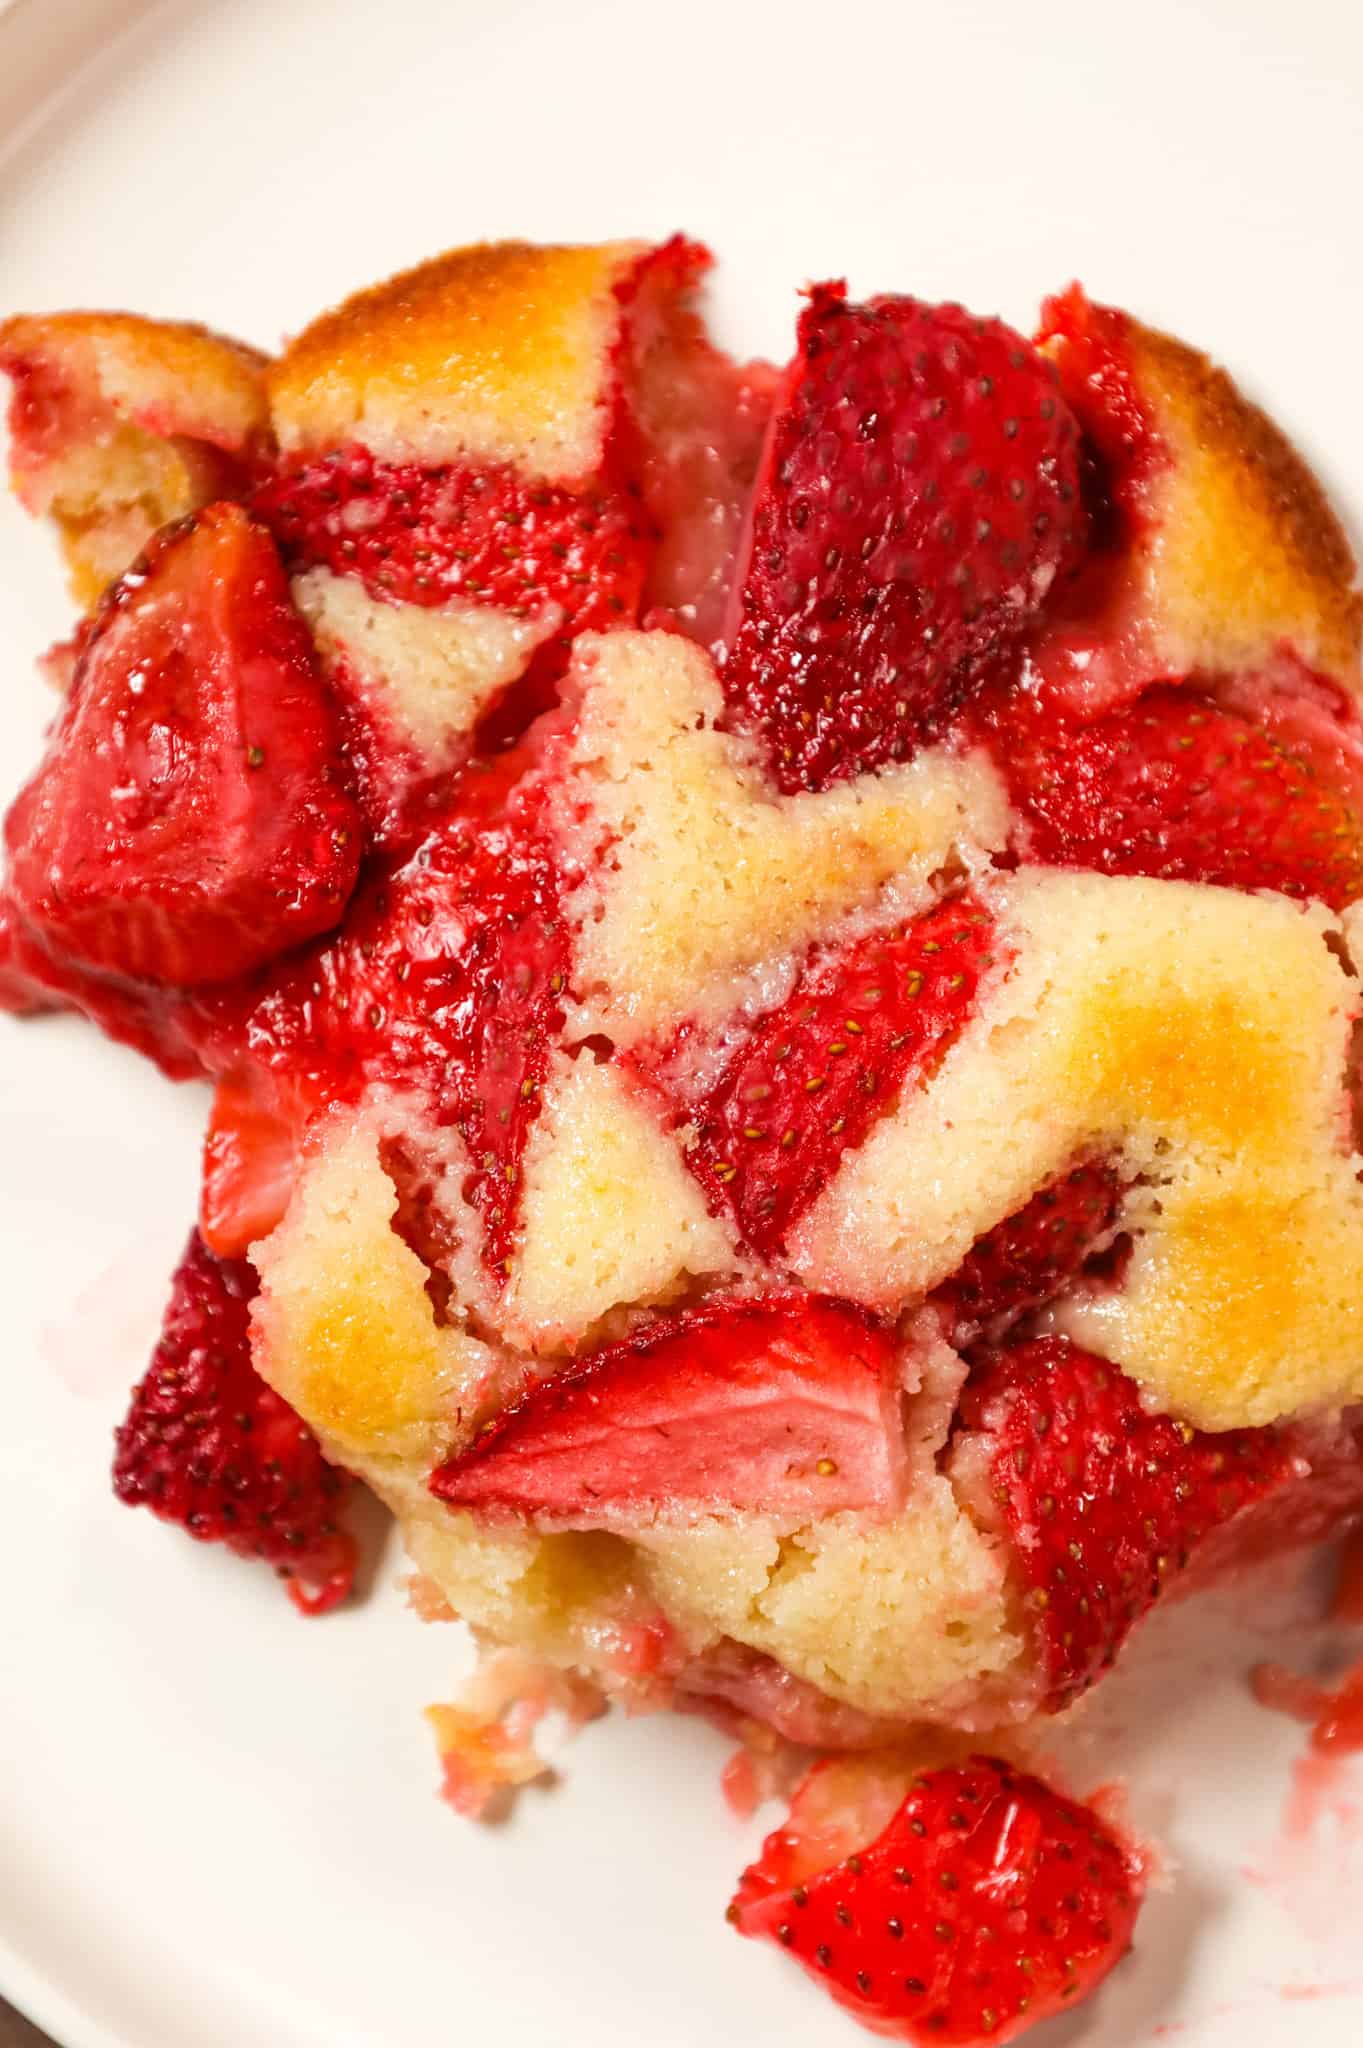 Strawberry Cobbler is an easy and delicious dessert recipe made with fresh strawberries baked in a delicious vanilla cake like batter.